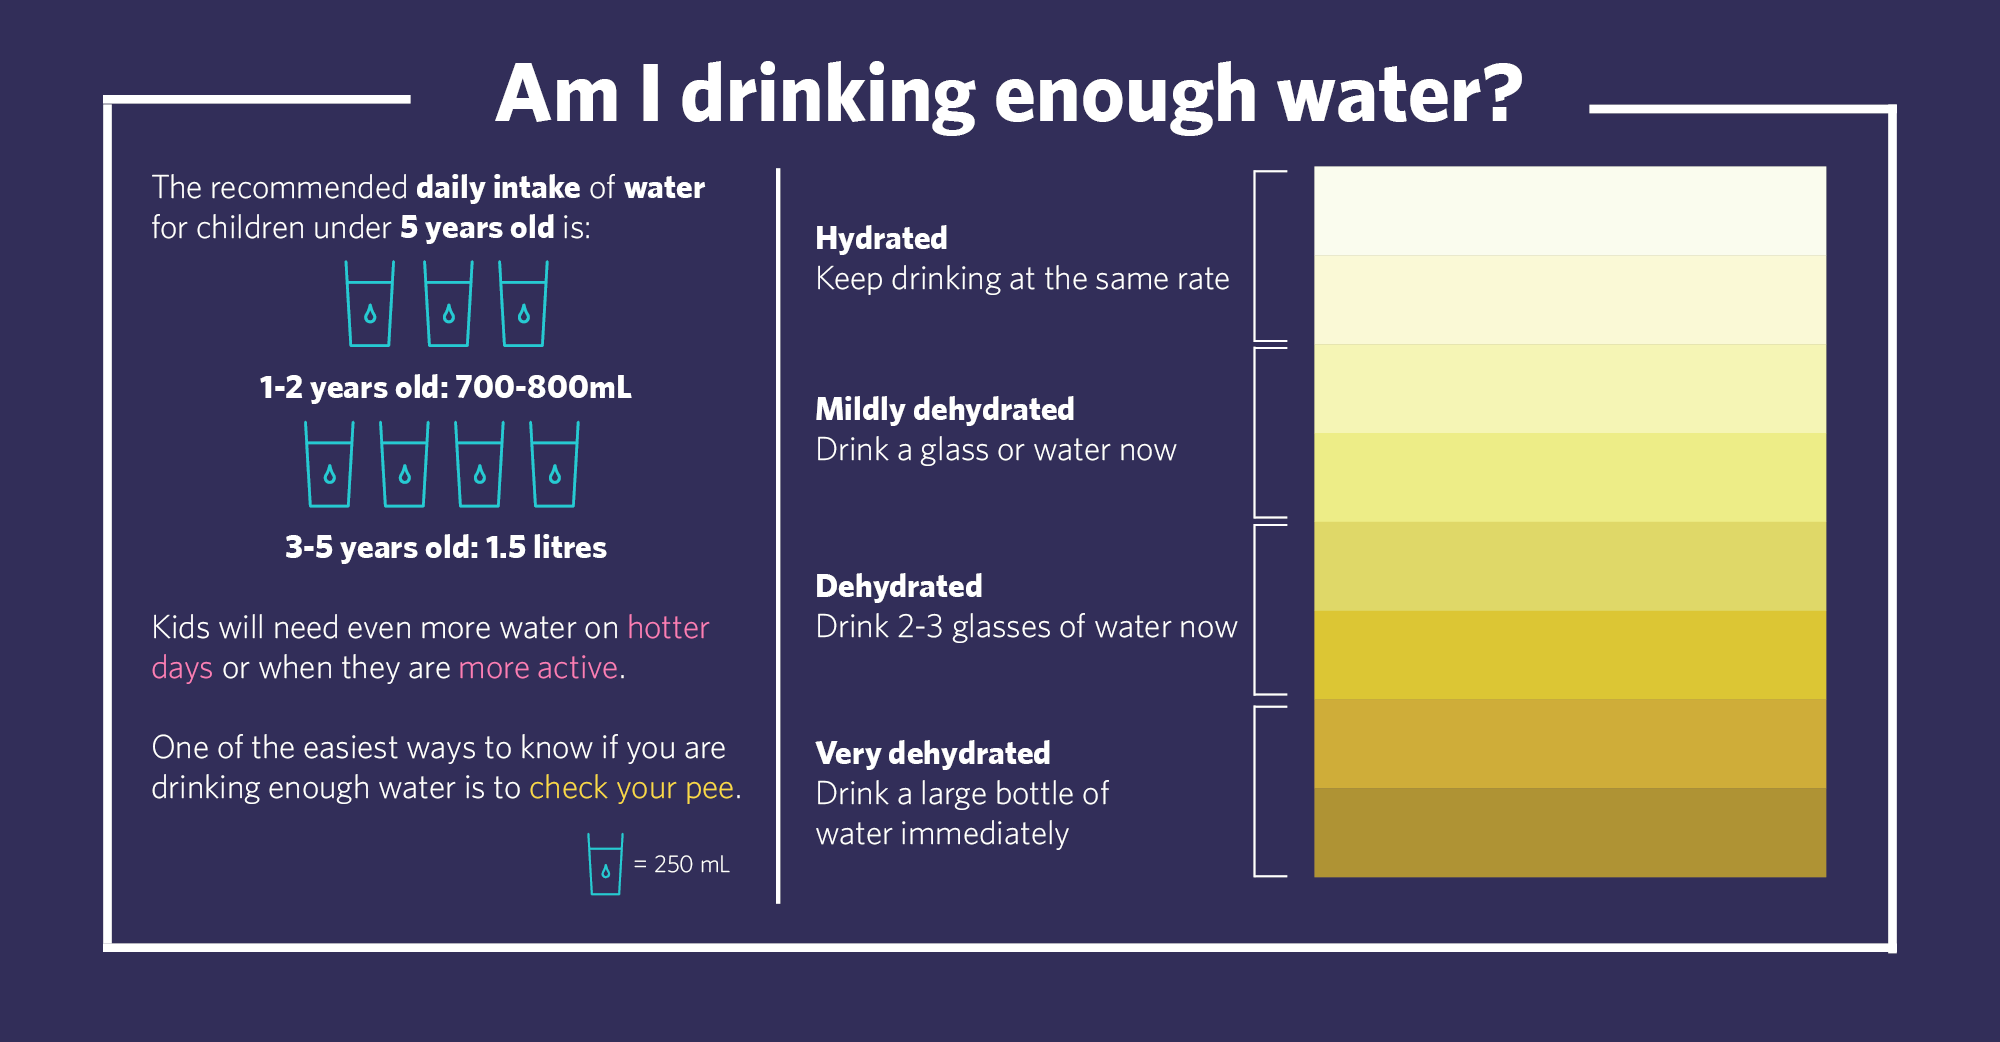 Water recommendations for children under 5 years